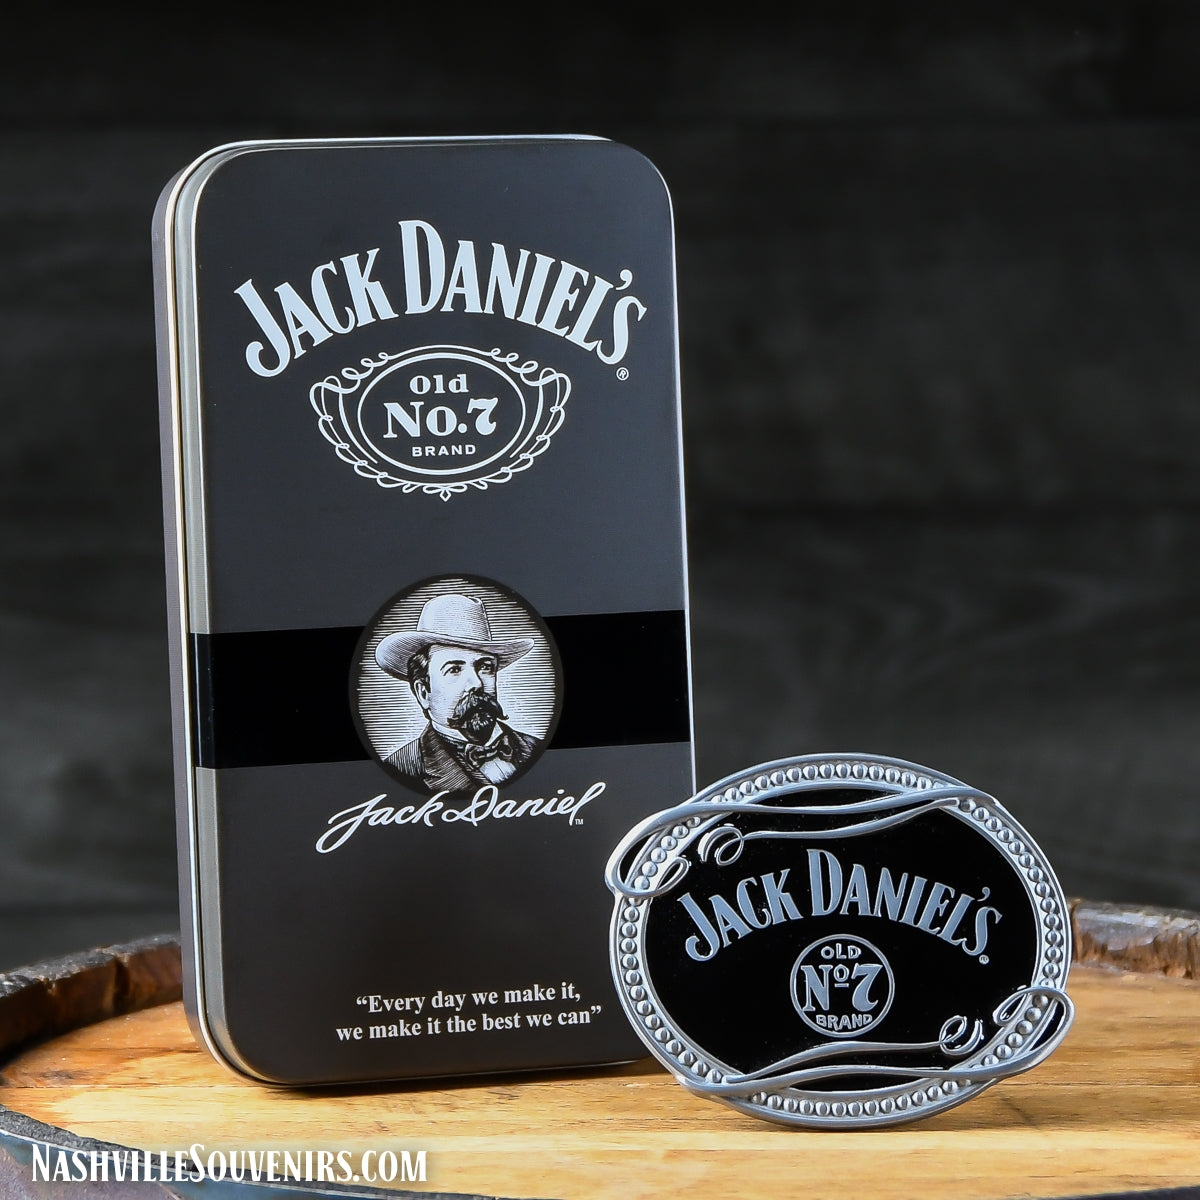 Officially licensed Jack Daniels Belt Buckle with Old No.7 Logo. This beautiful buckle has the JD Swing and Bug Logo on a contrasting black background.